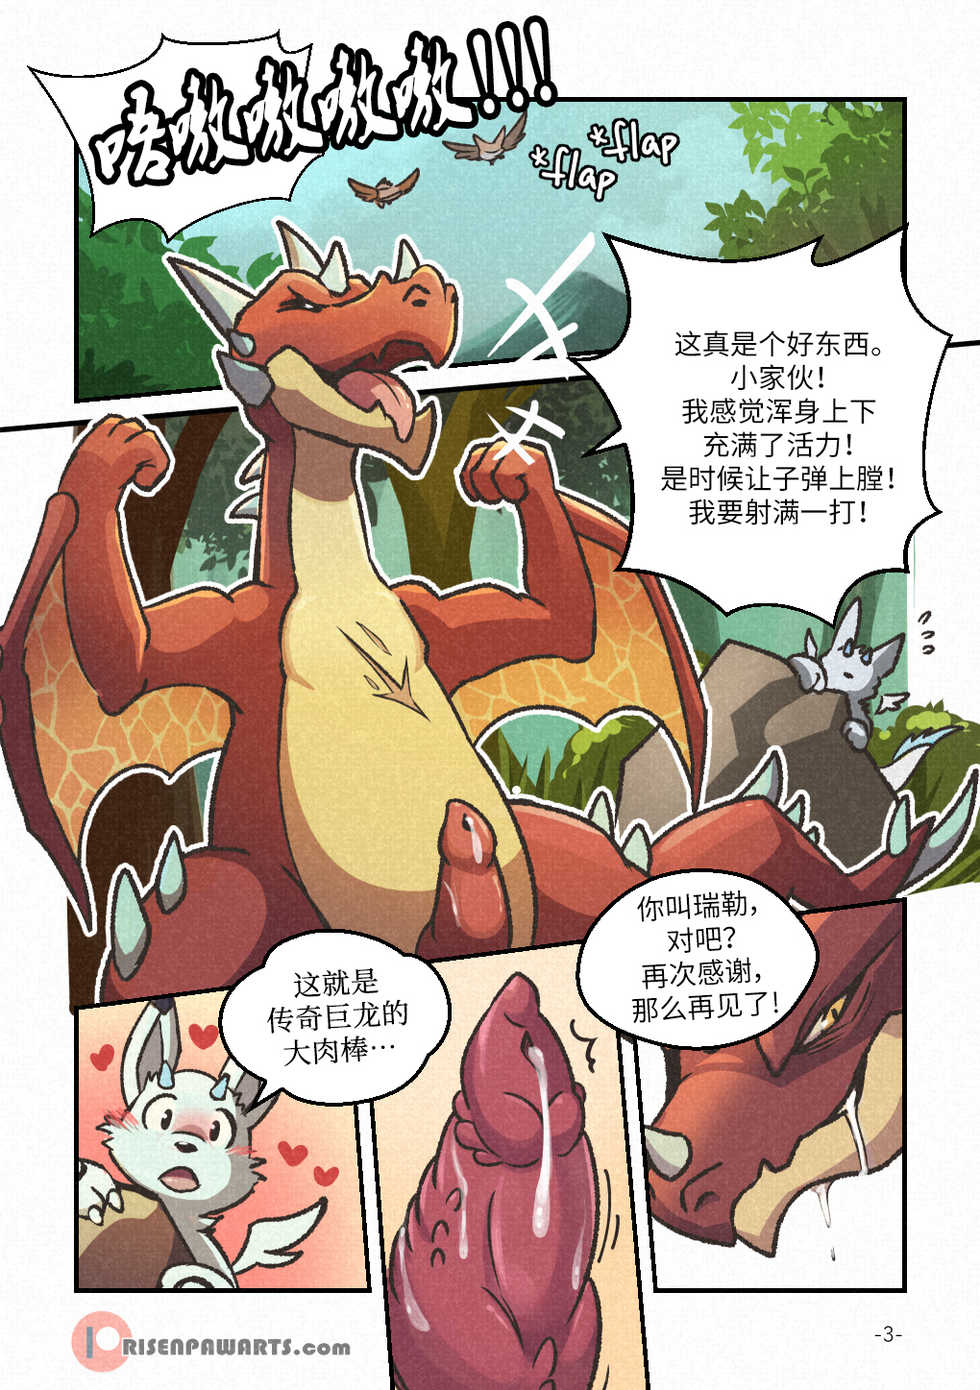 [Risenpaw] Out of Control [Chinese] [悬赏大厅×不可视汉化组] - Page 2